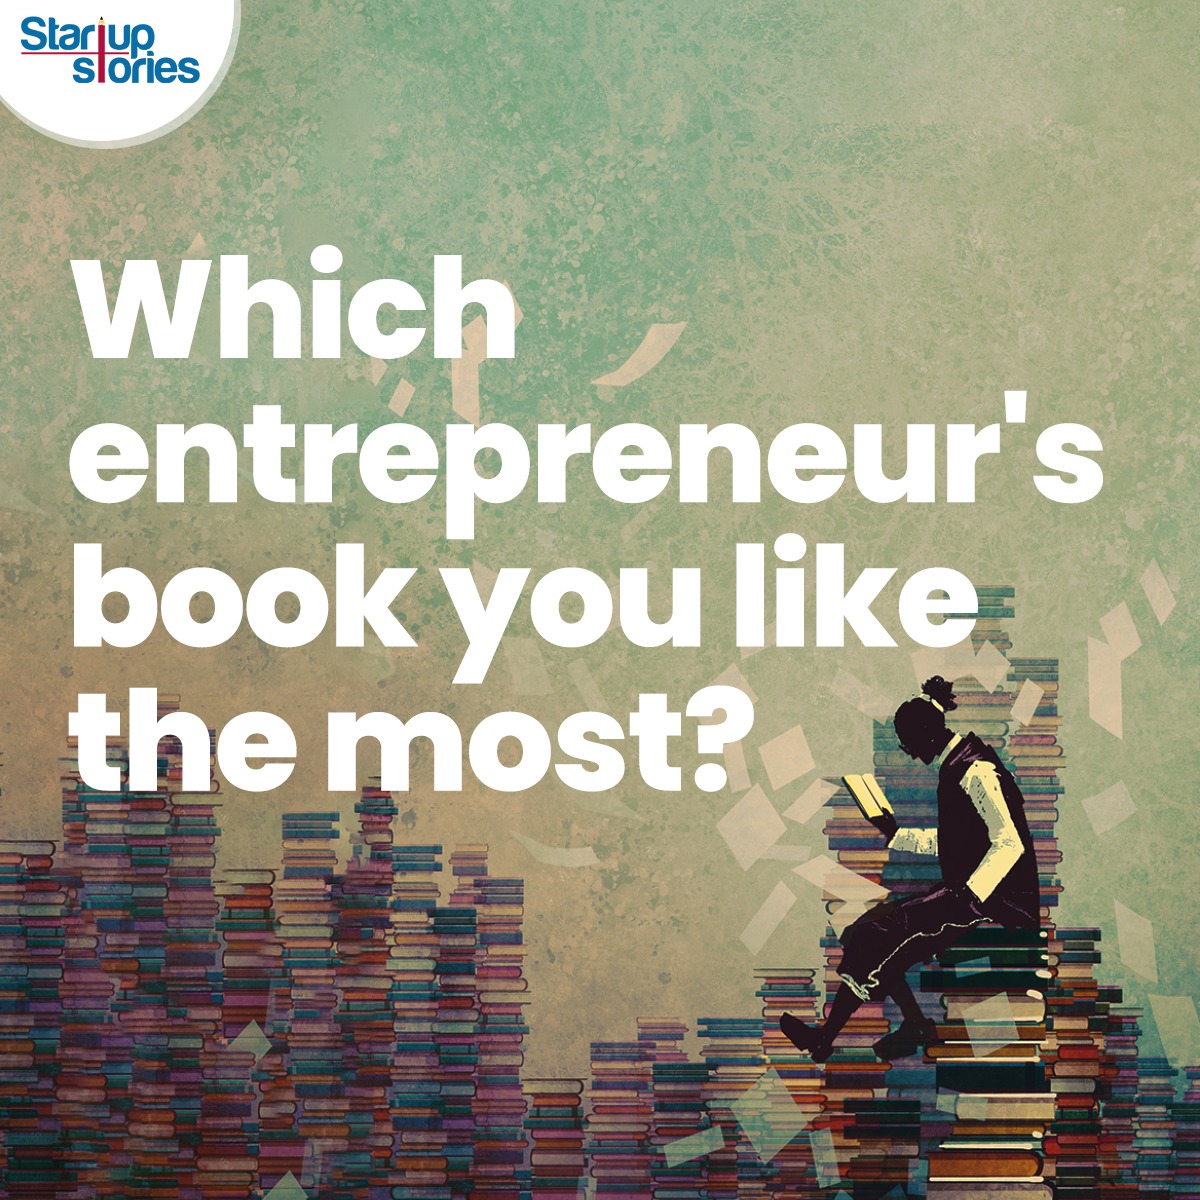 Let us know in comments below.

#StartupStories #InteractivePost #Startups #Entrepreneurs #BooksDay #Companies #Innovation